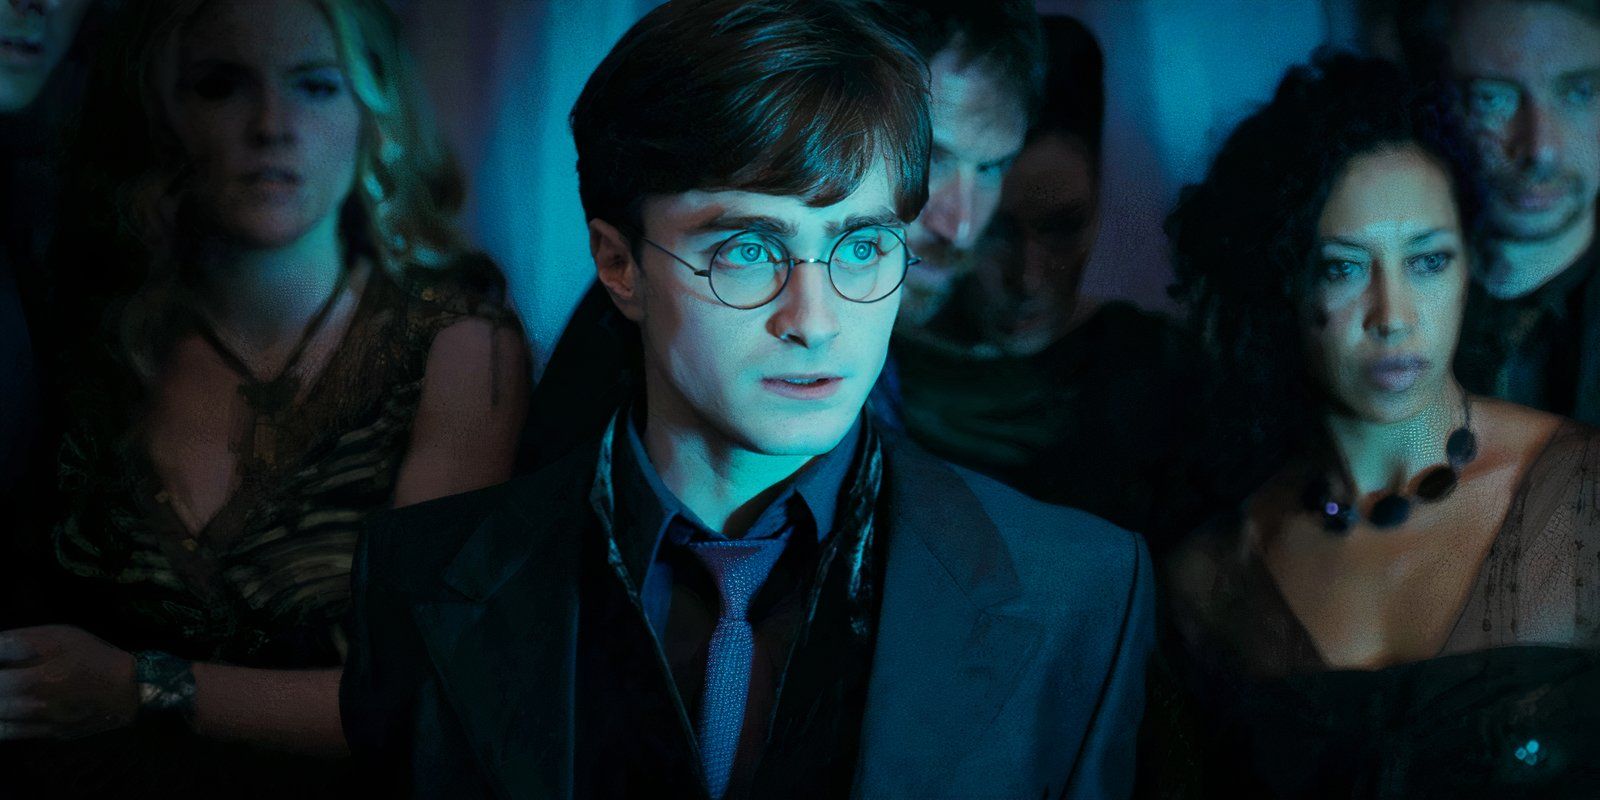 Daniel Radcliffe as Harry Potter in Harry Potter in the Deathly Hallows Part 1